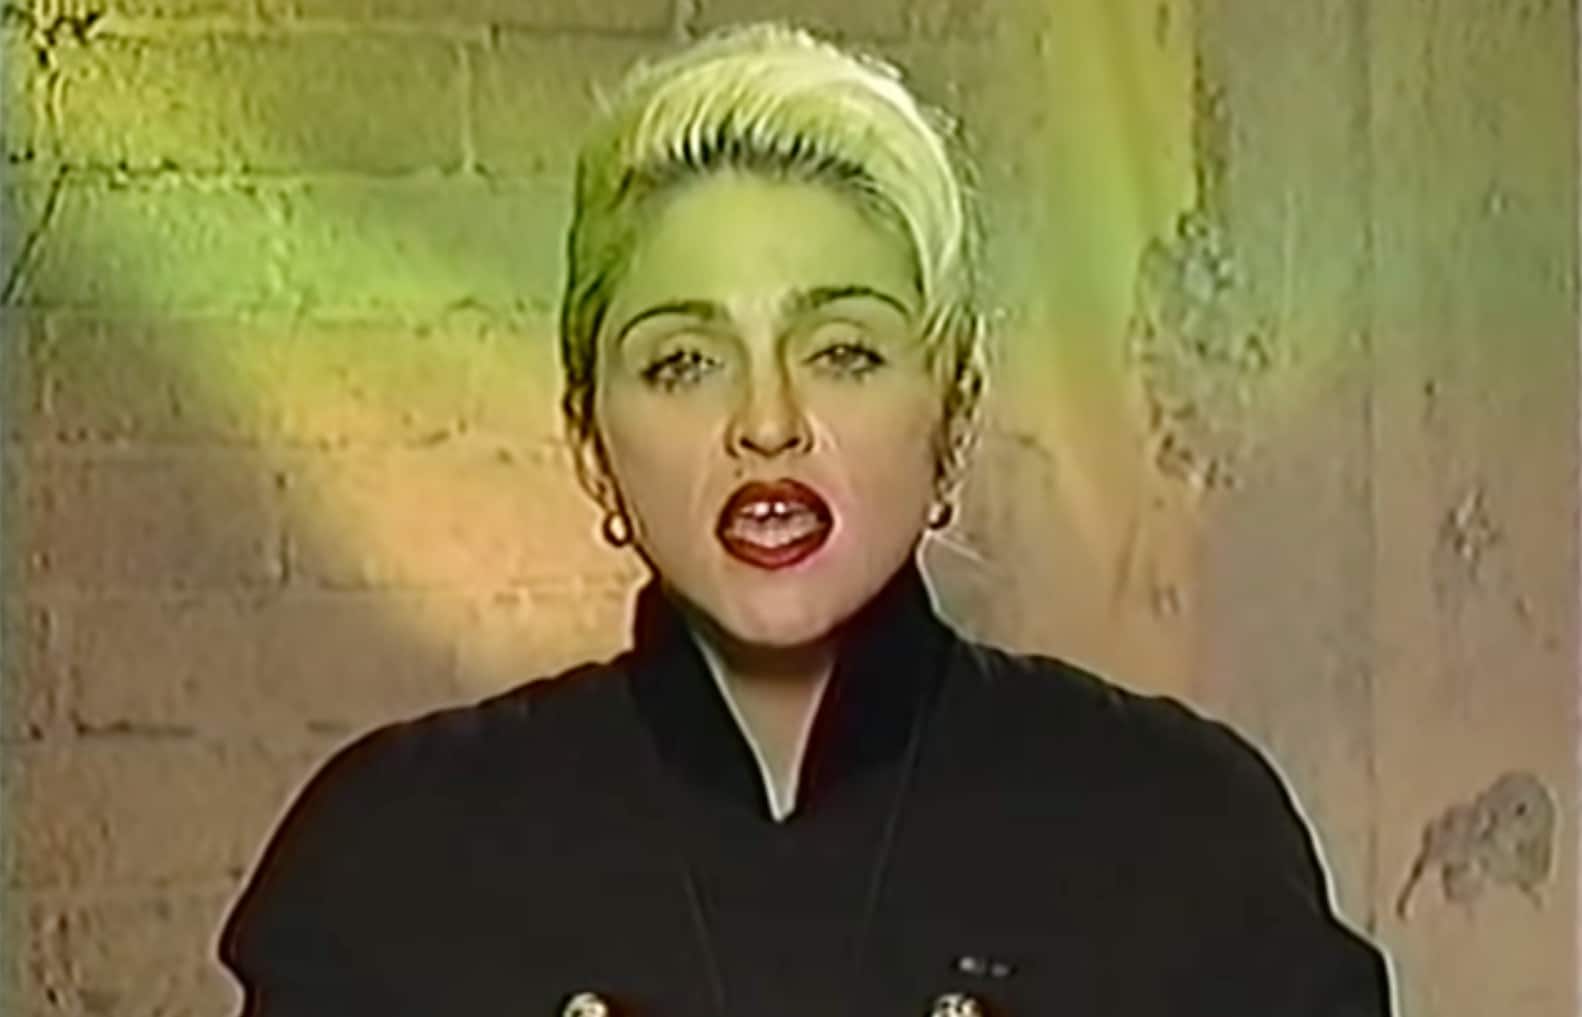 1582px x 1017px - Madonna expertly dissects sex and sexuality in 1990 Nightline interview